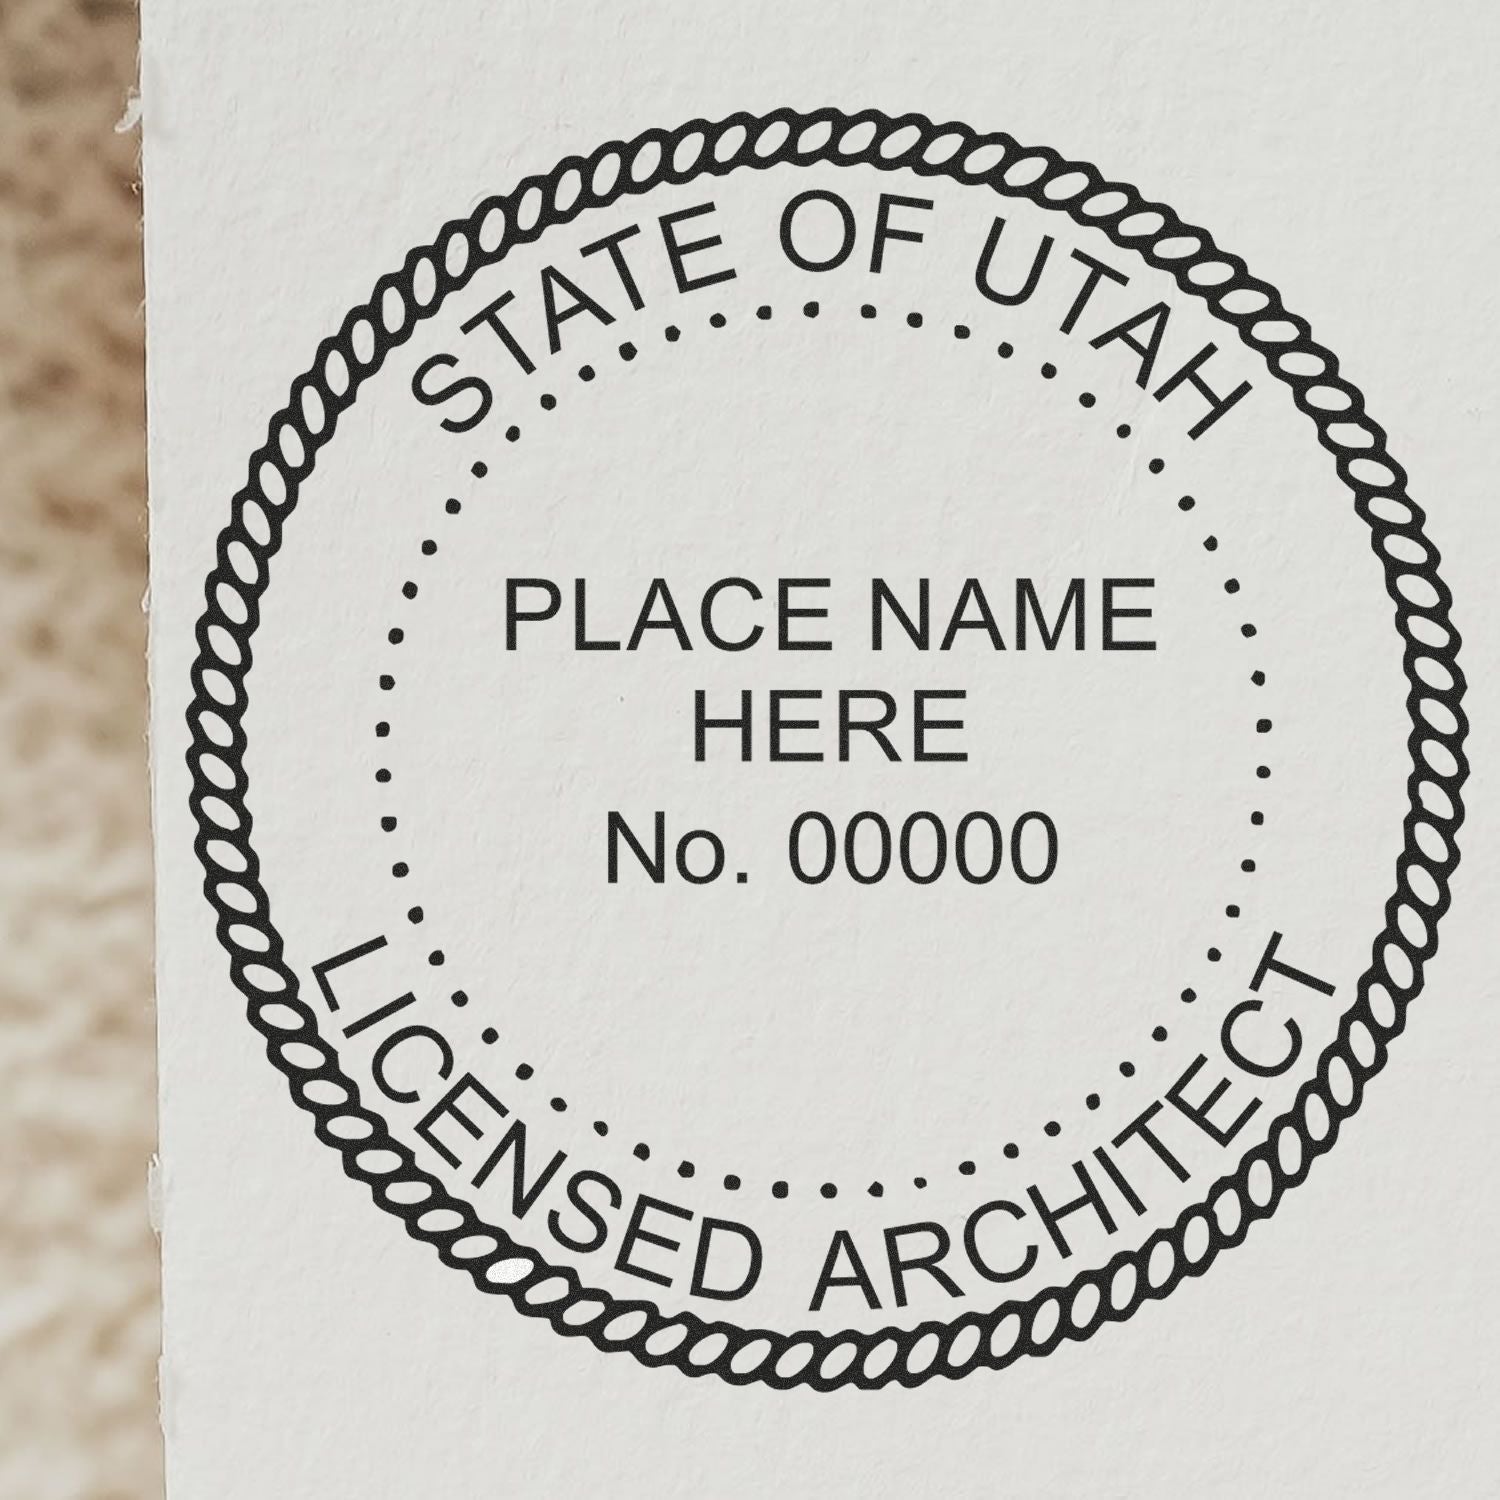 Slim Pre-Inked Utah Architect Seal Stamp in use photo showing a stamped imprint of the Slim Pre-Inked Utah Architect Seal Stamp